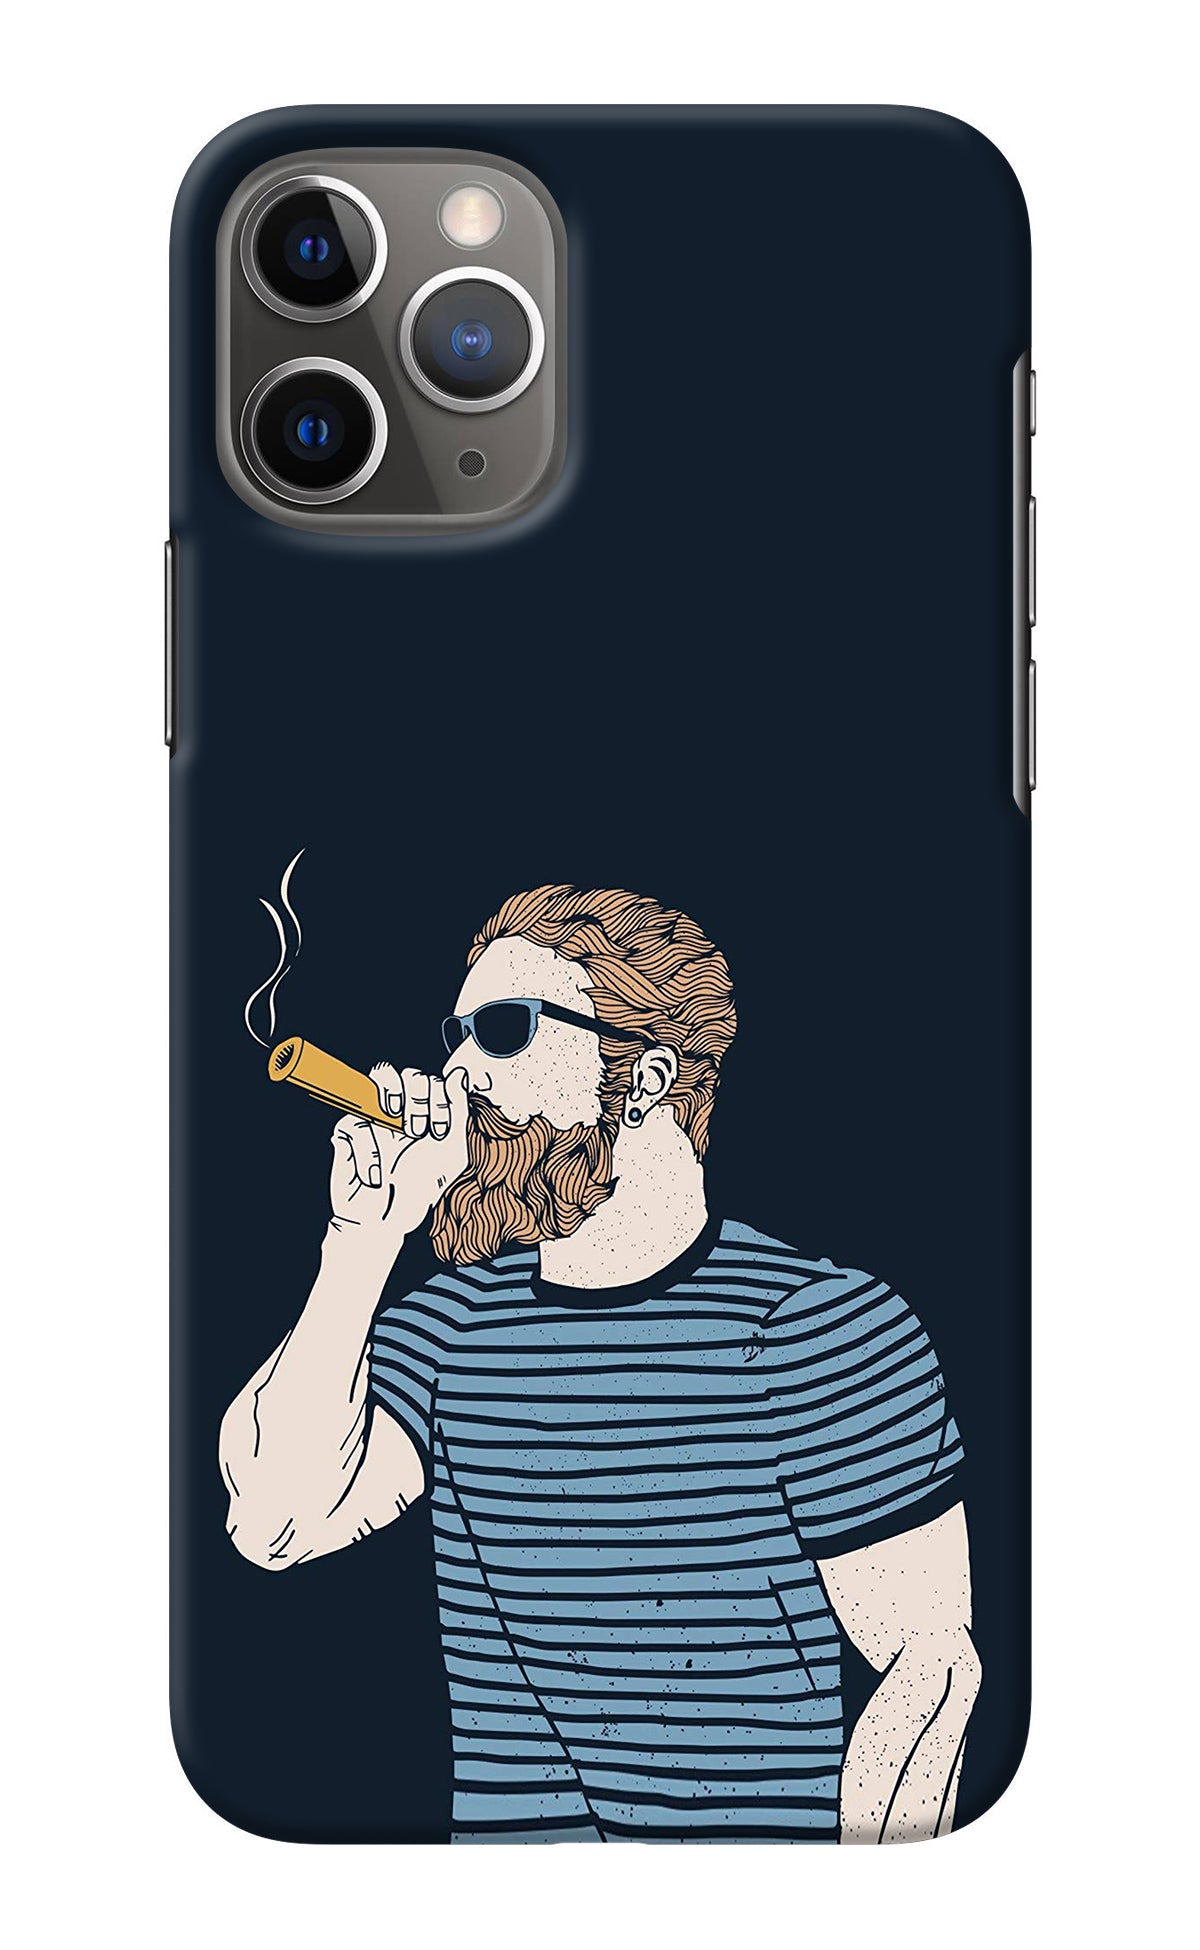 Smoking iPhone 11 Pro Back Cover